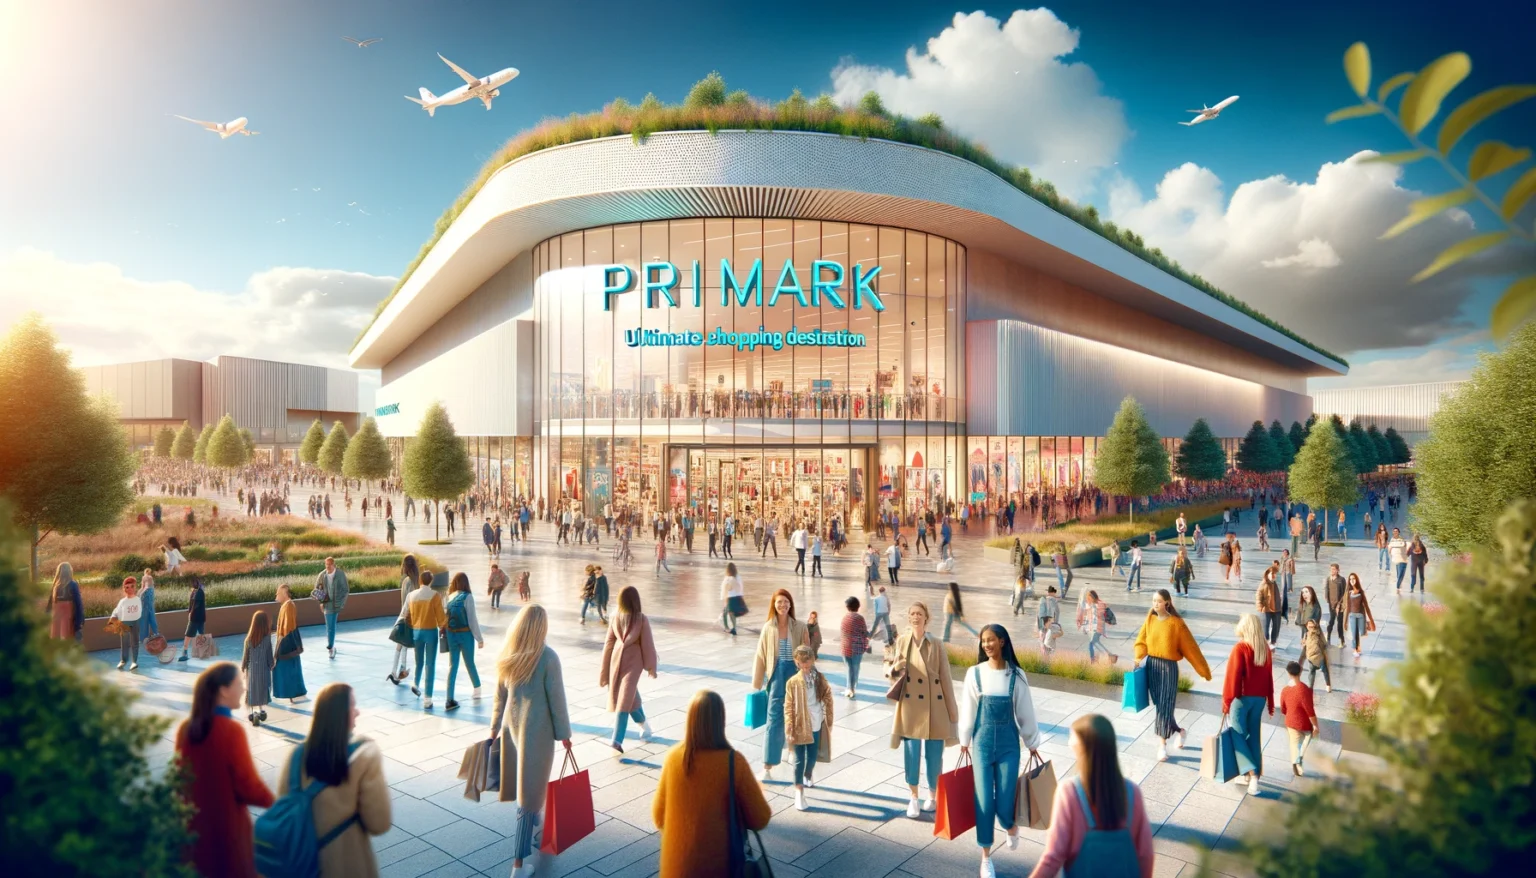 Discover Primark Braehead: Your Ultimate Shopping Destination